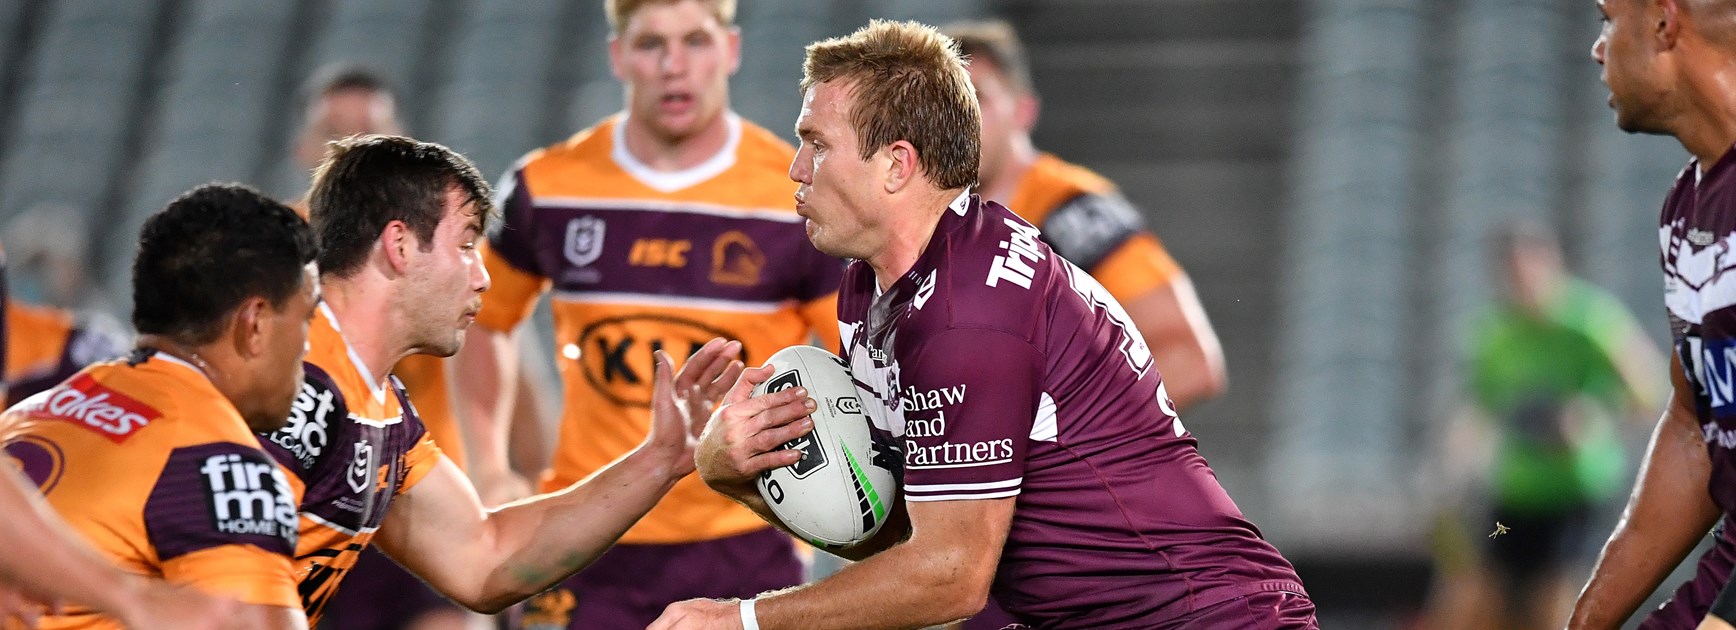 Sea Eagles rally to beat Broncos in tight finish